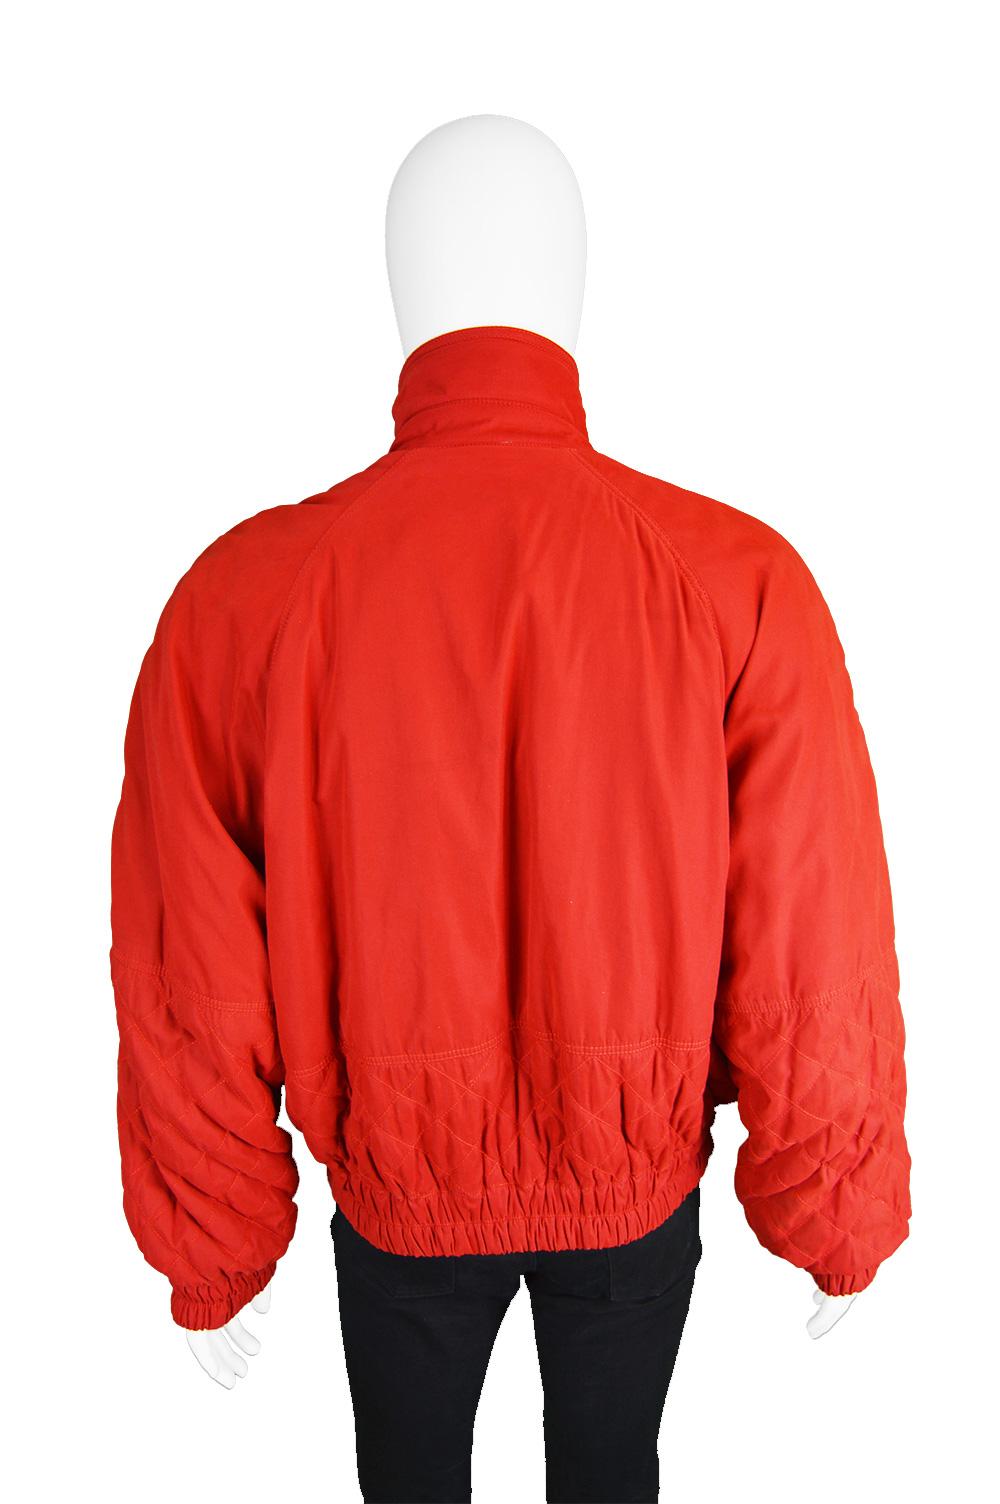 Oliver by Valentino Men's Vintage Red Quilted Bomber Jacket Coat, 1980s 4